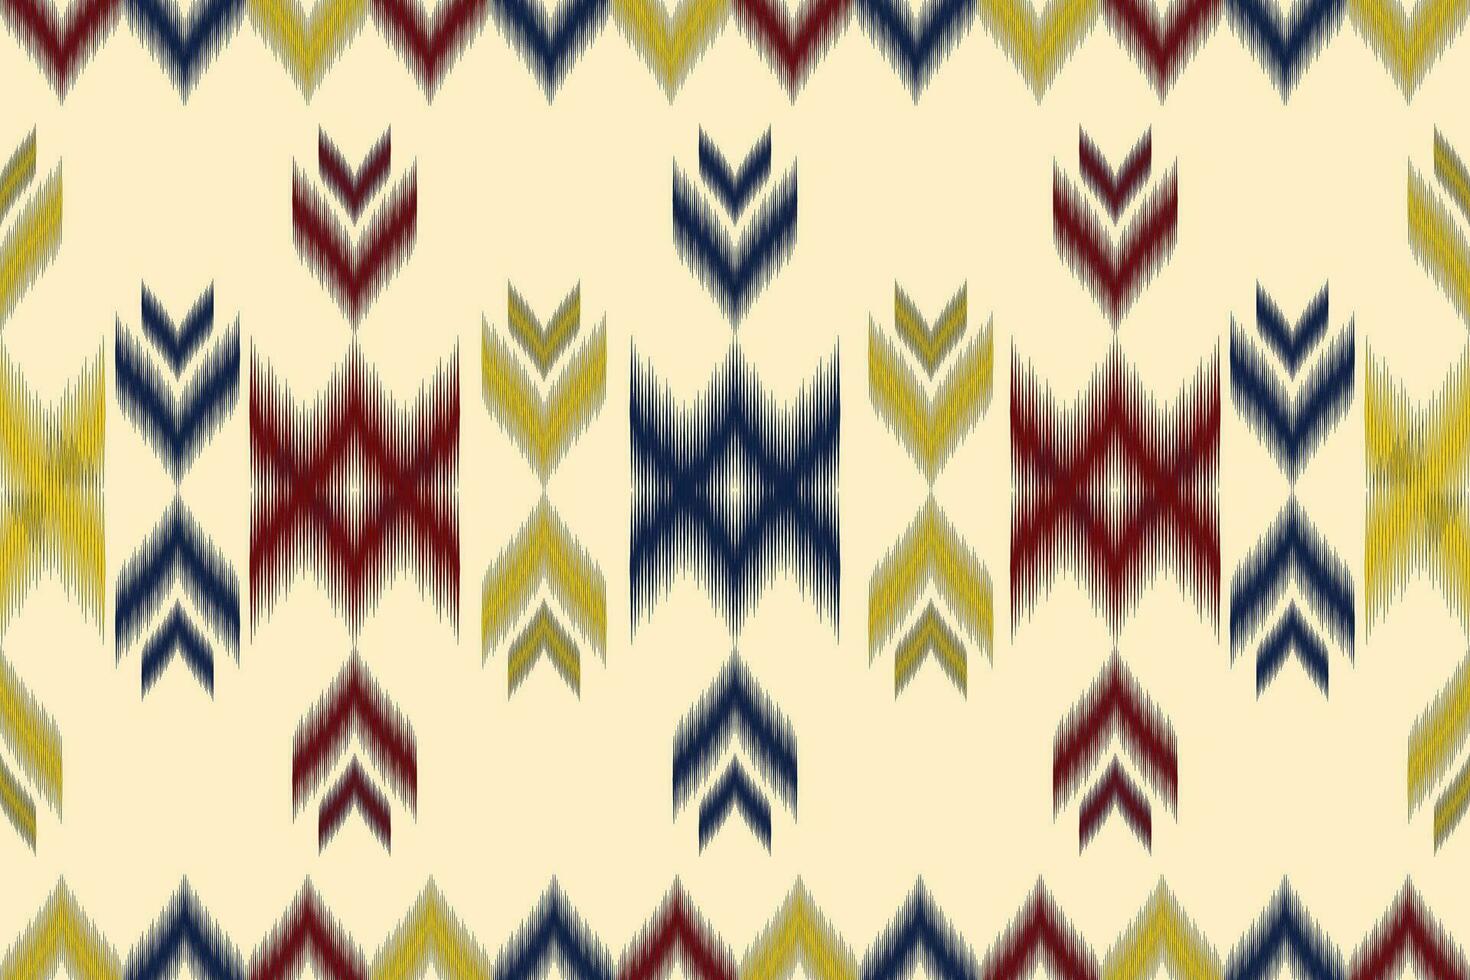 Geometric ethnic seamless pattern traditional. American, Mexican style. Design for background, wallpaper, illustration, fabric, clothing, carpet, textile, batik, embroidery. vector